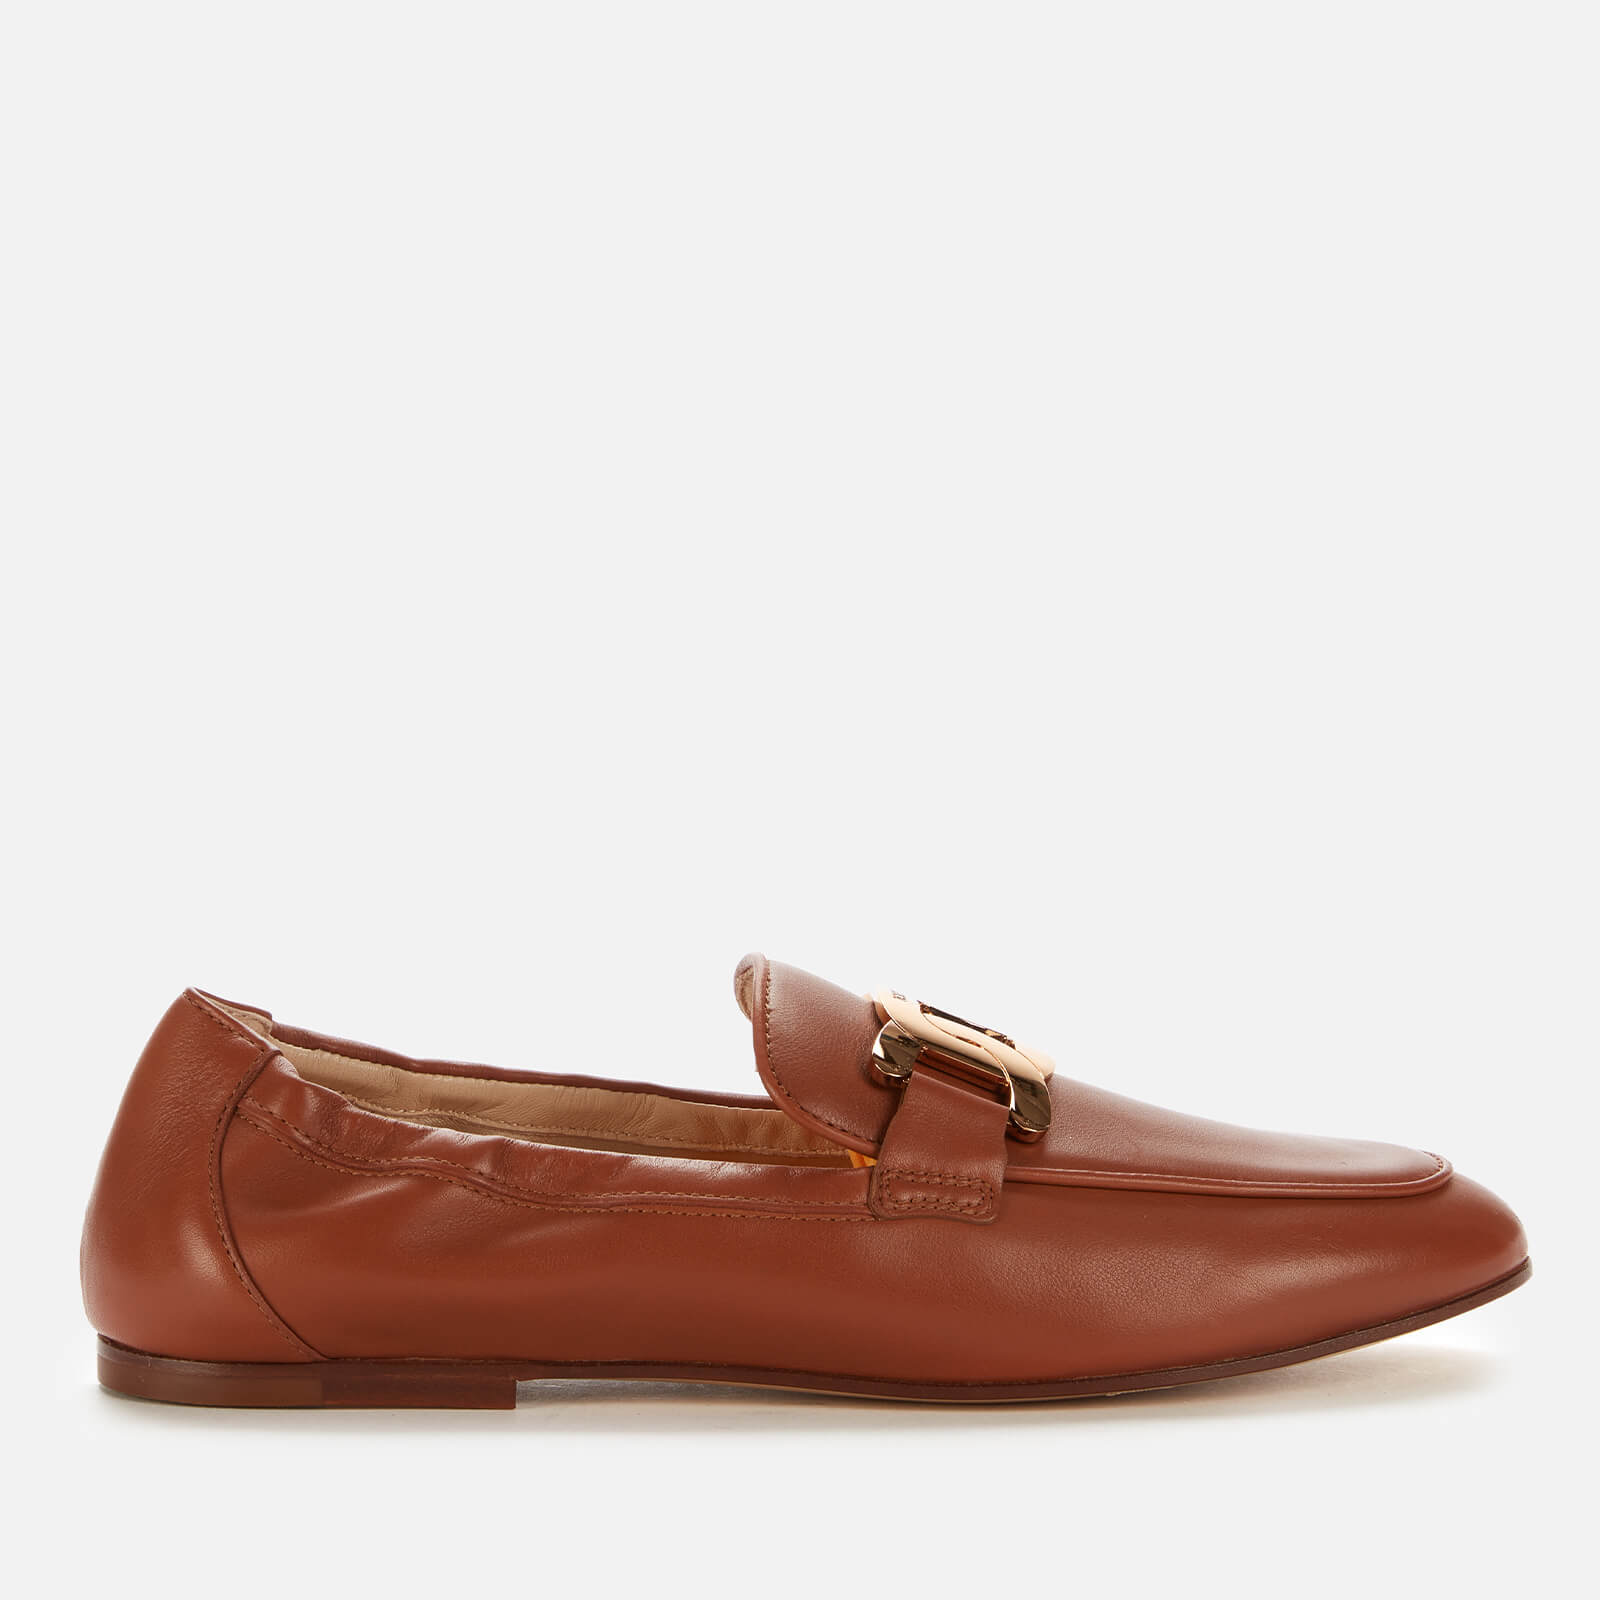 Tod's Women's Kate Leather Loafers - Tan - UK 7